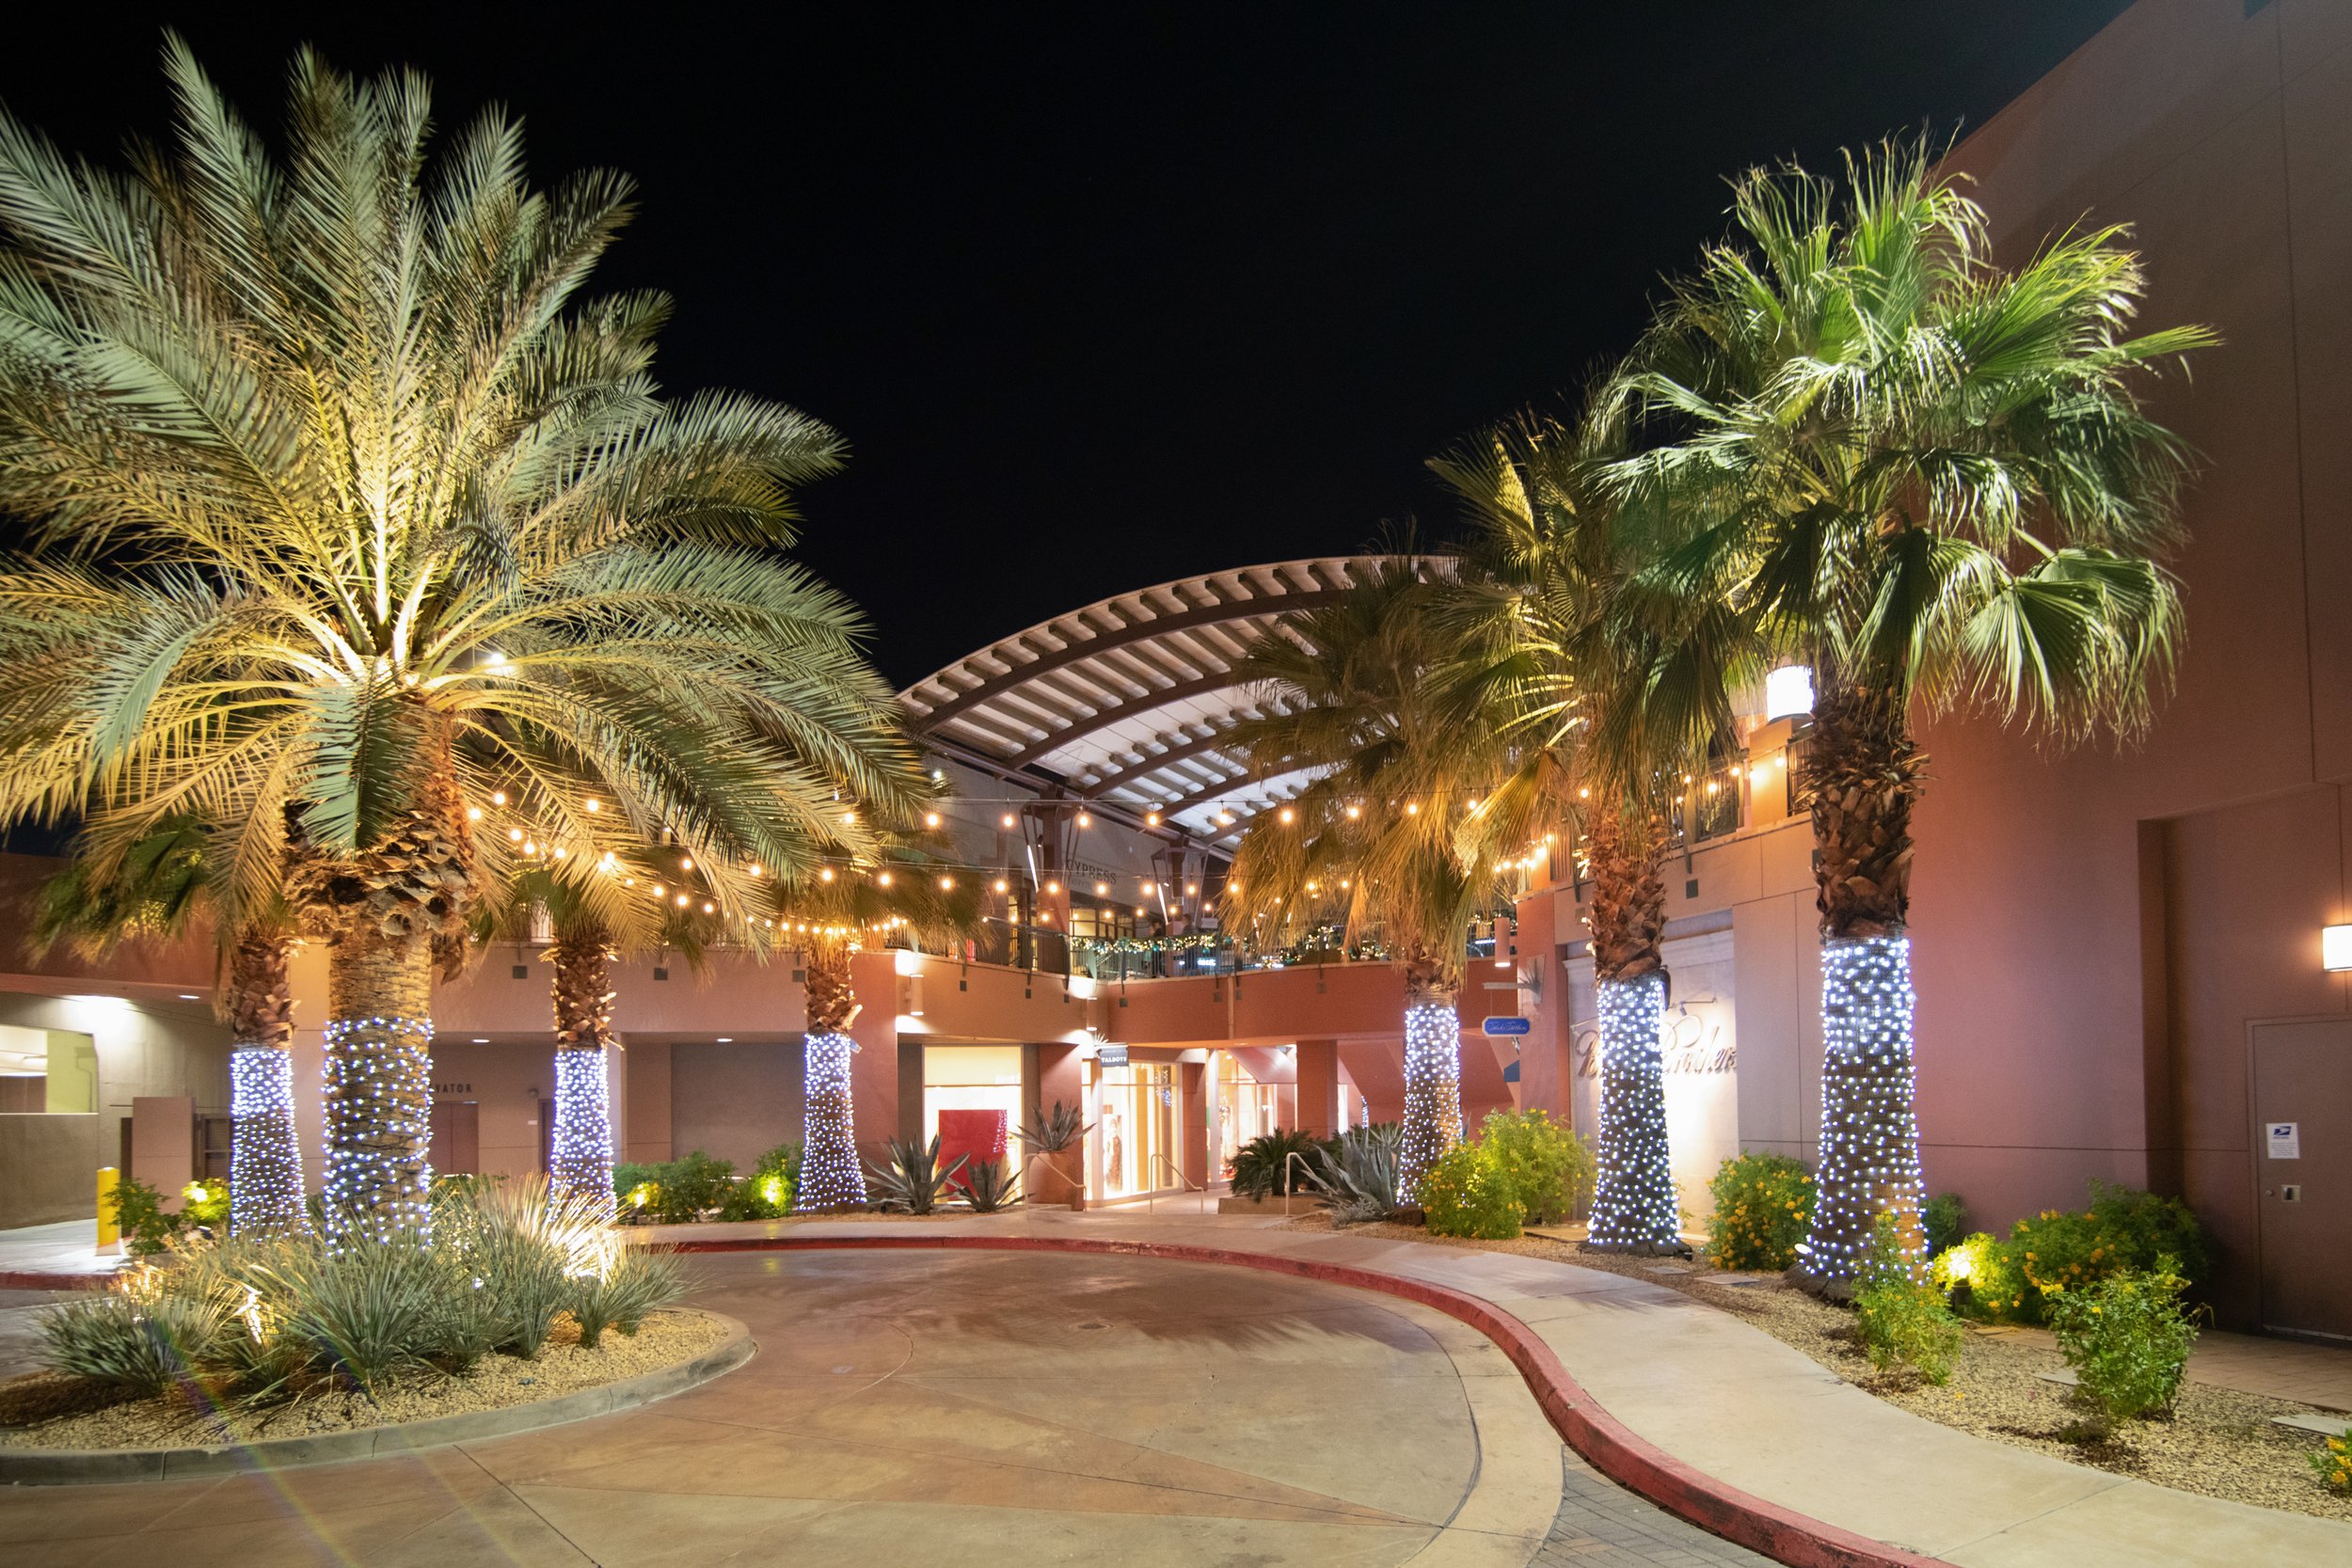 The Gardens on El Paseo in Palm Desert continues to attract new stores